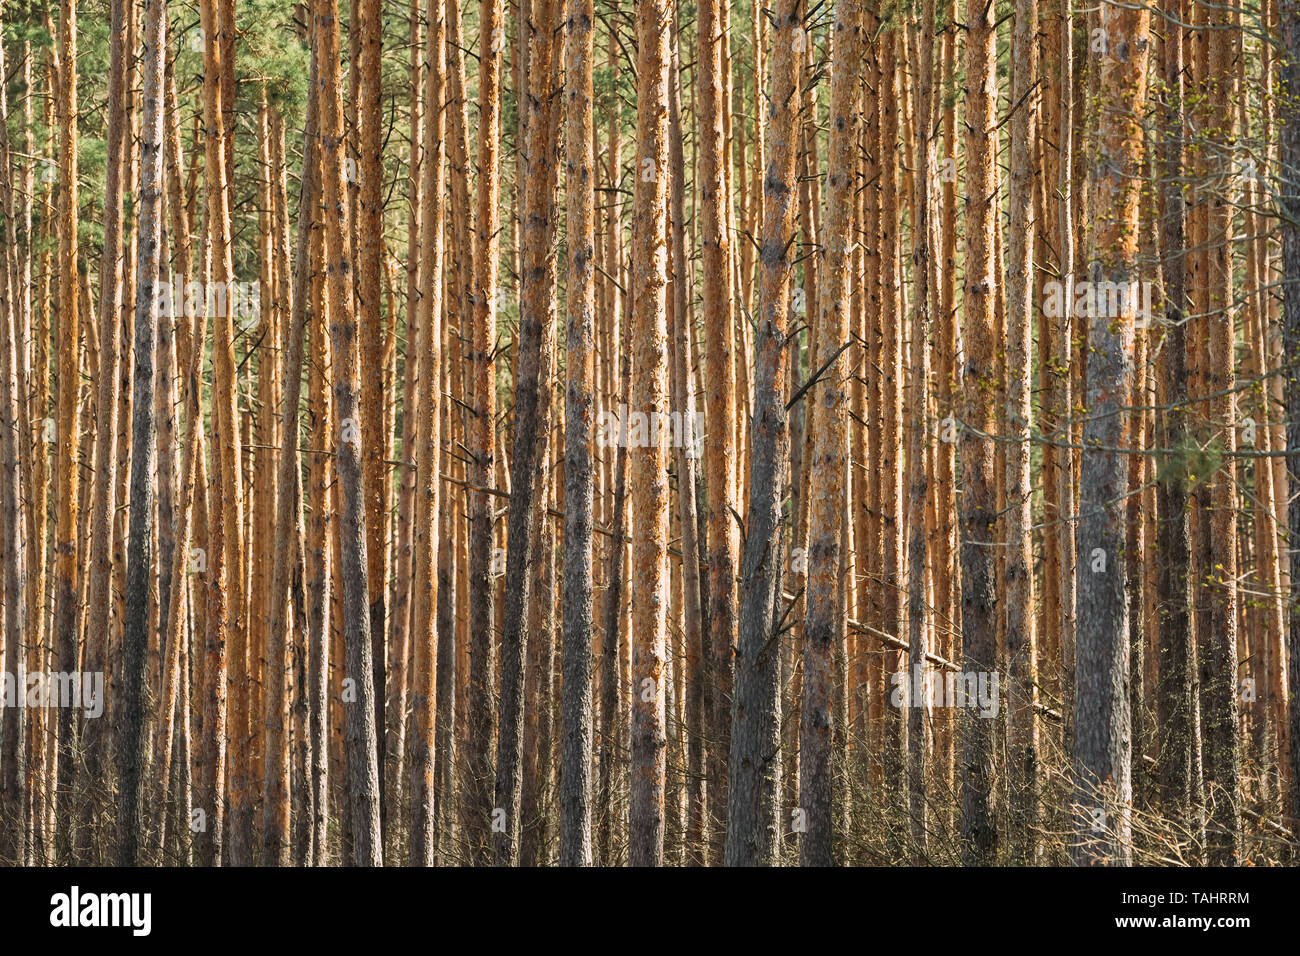 Sunny Day In Pine Forest. Close View Of Trunks In Coniferous Forest. Stock Photo